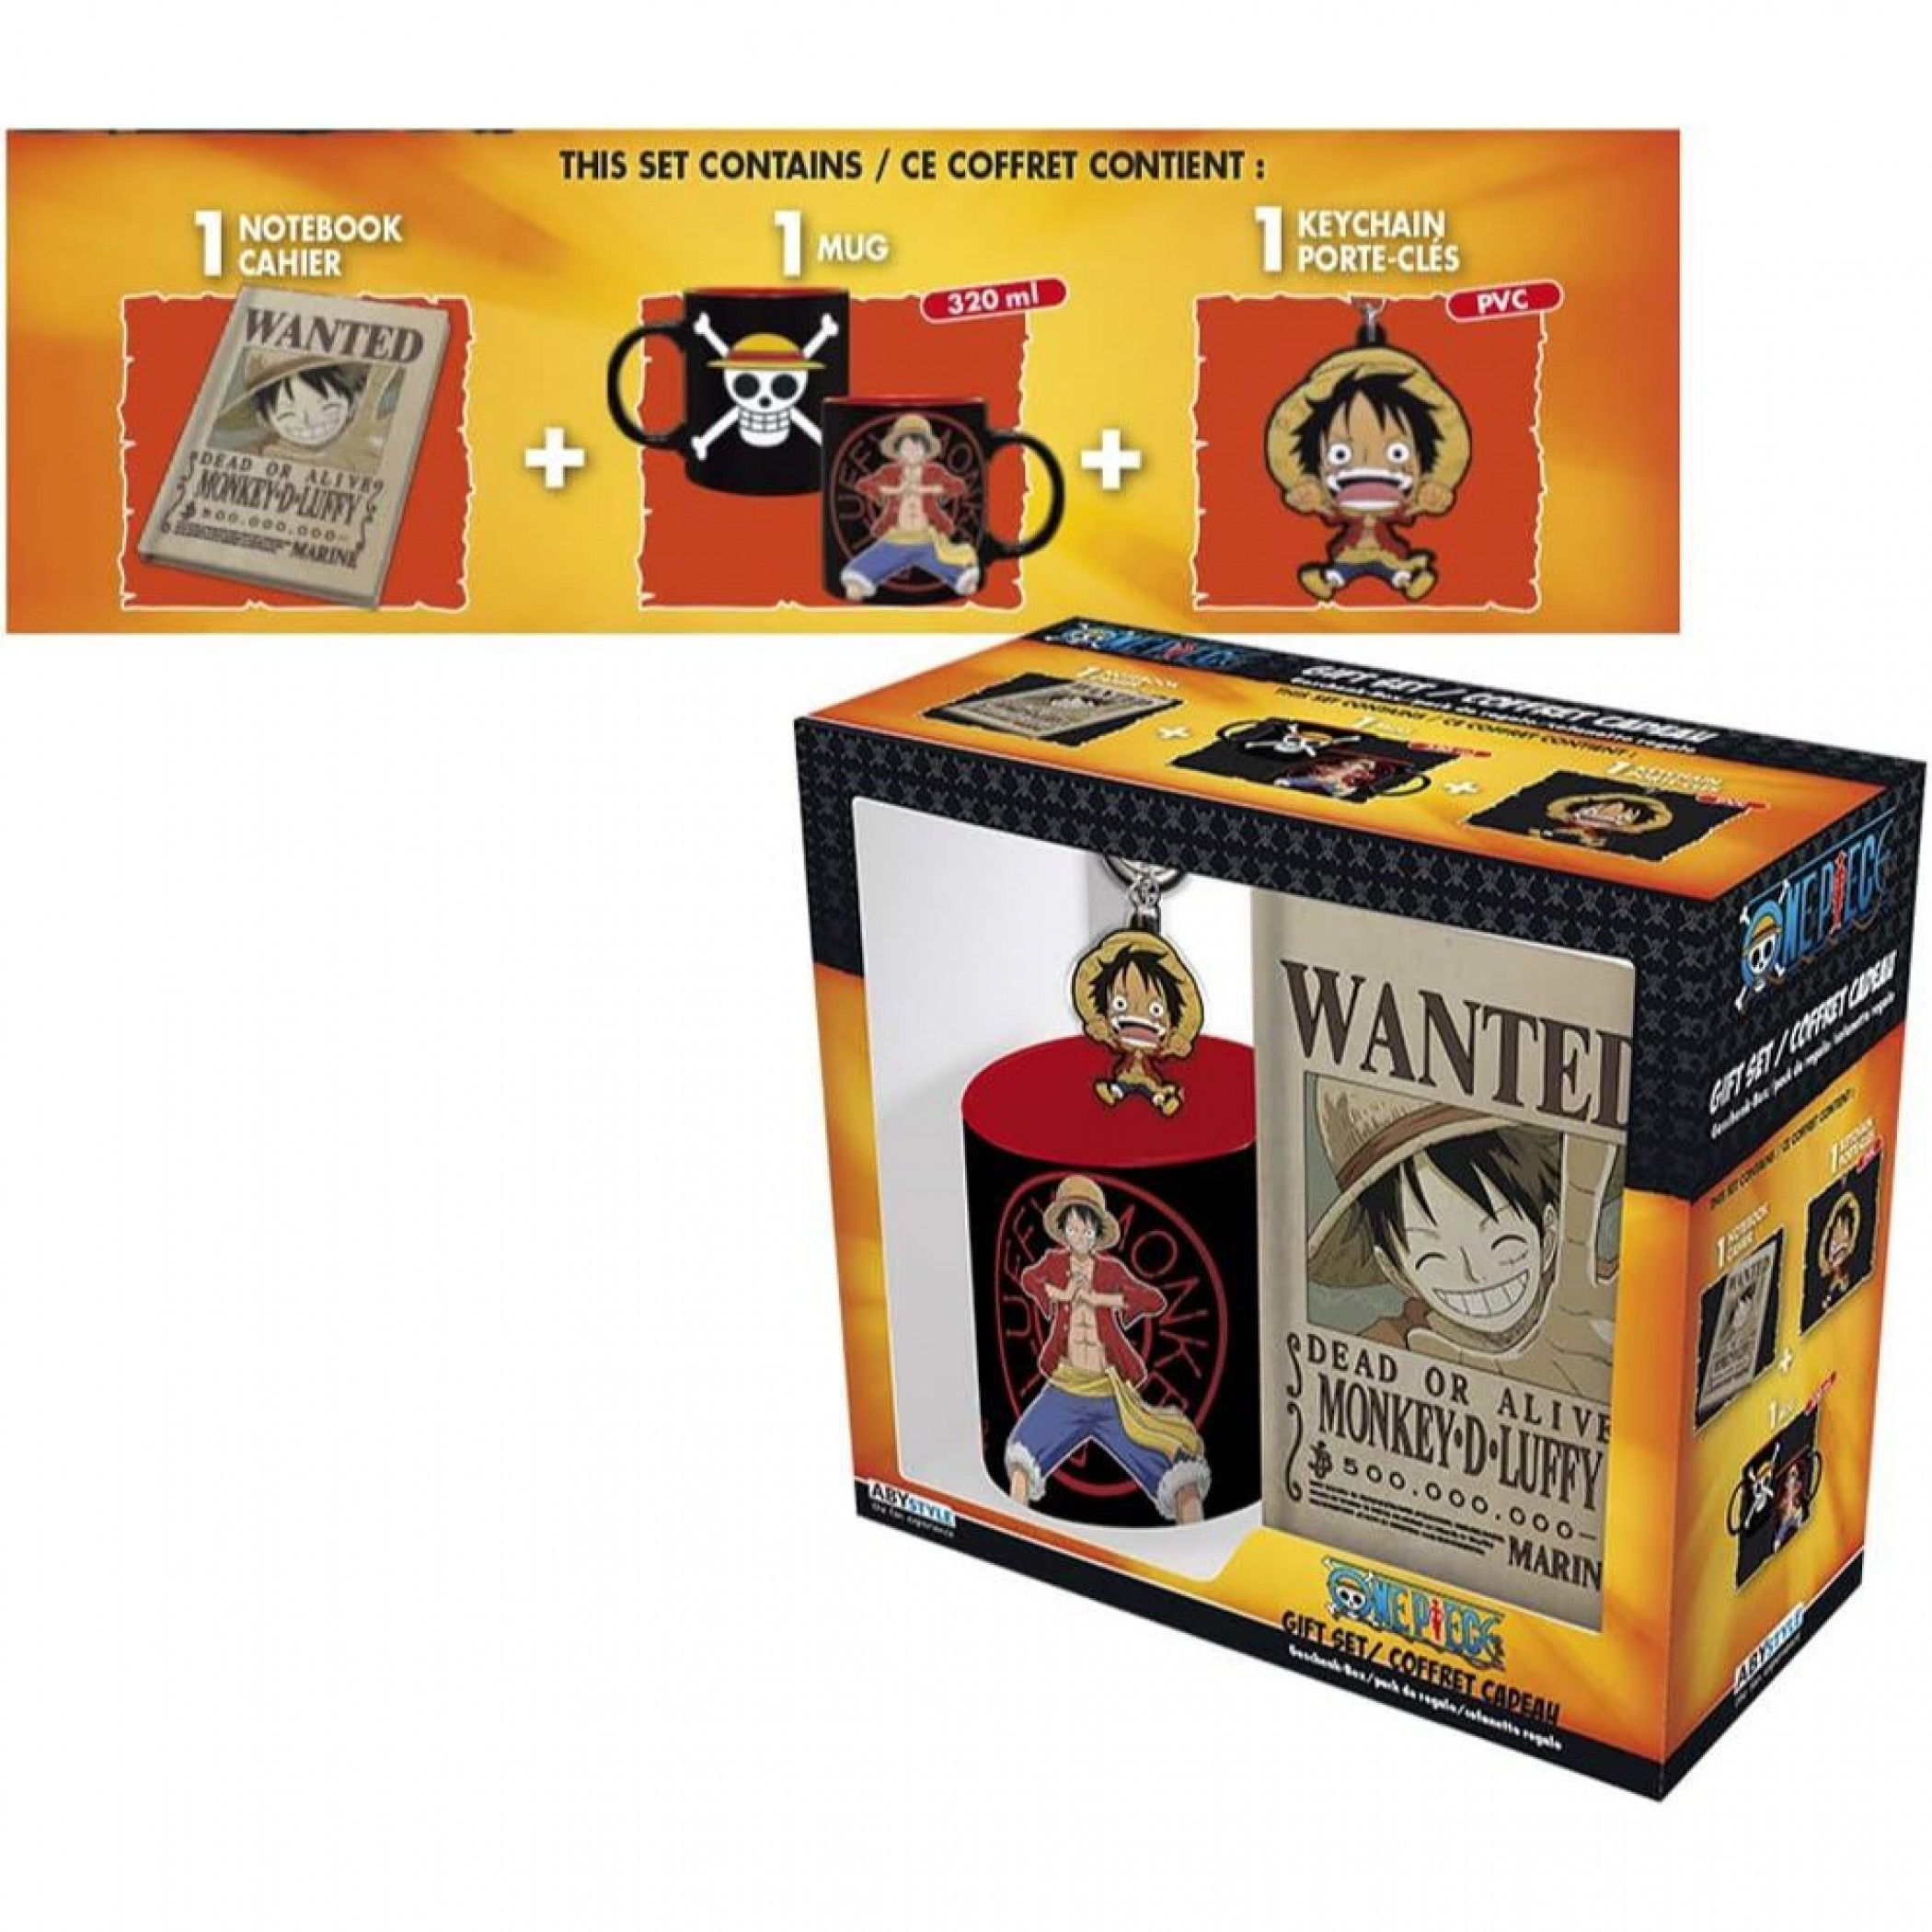 One Piece - Monkey D. Luffy 3-Pc Gift Set (Includes Mug, Notebook, and –  ABYstyle USA